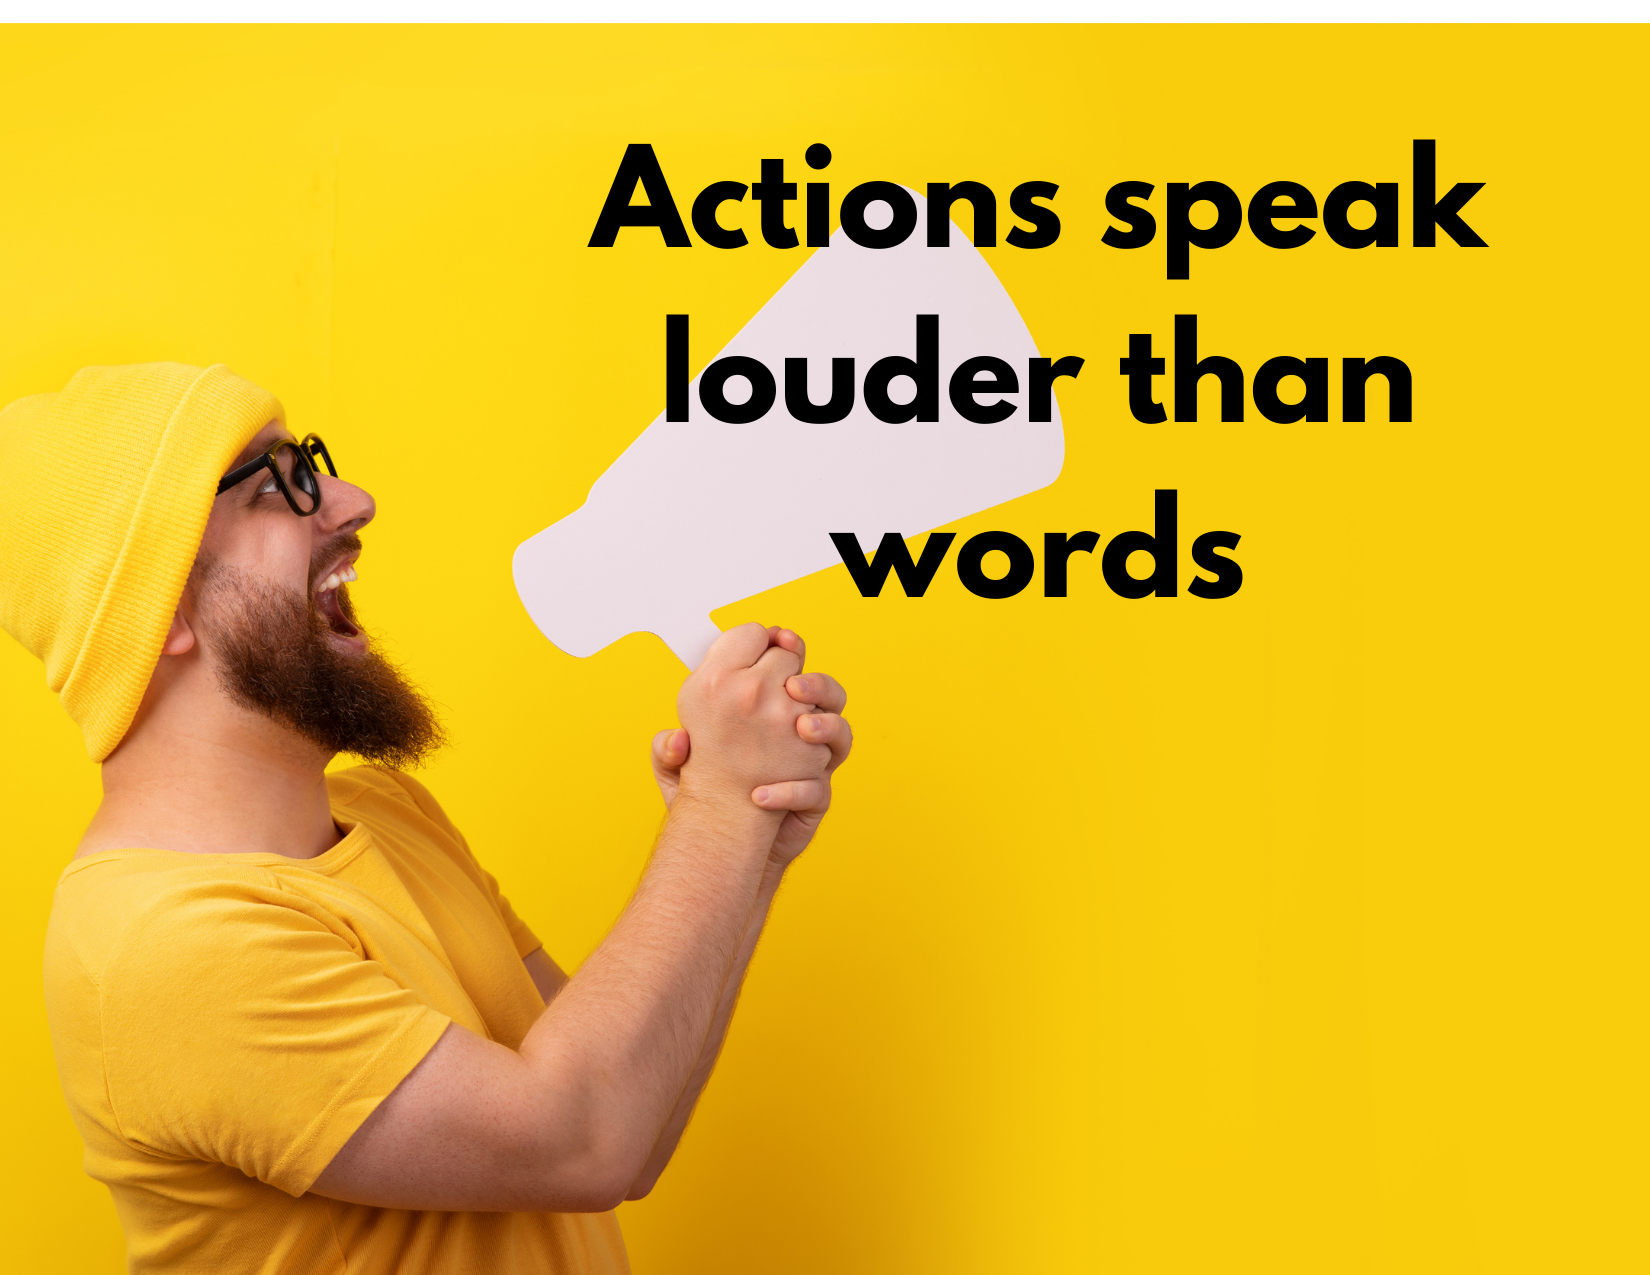 A picture of a man holding a megaphone with the words "Actions speak louder than words"